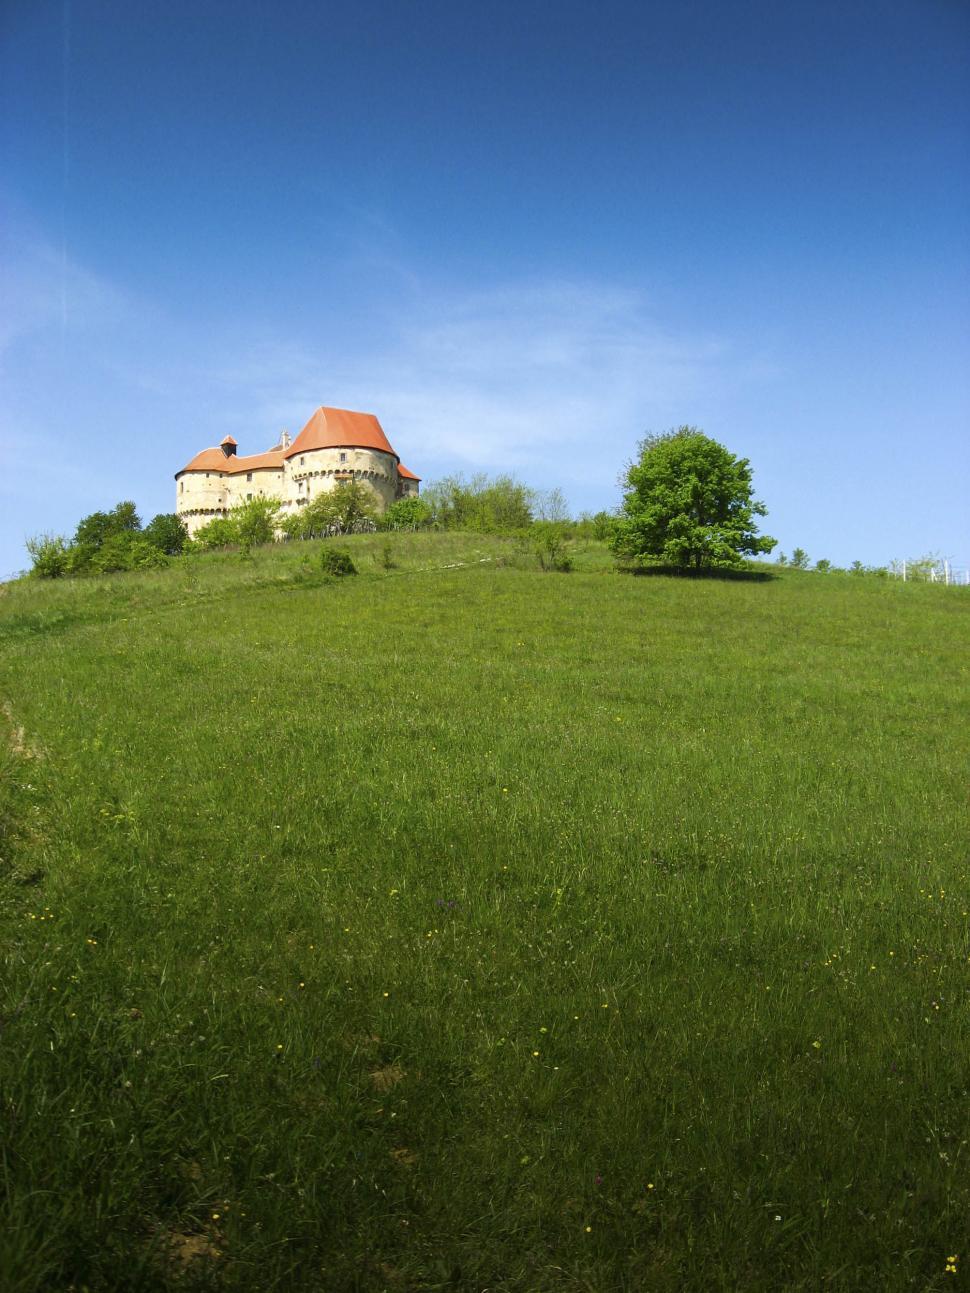 Free Image of castle on a hill 